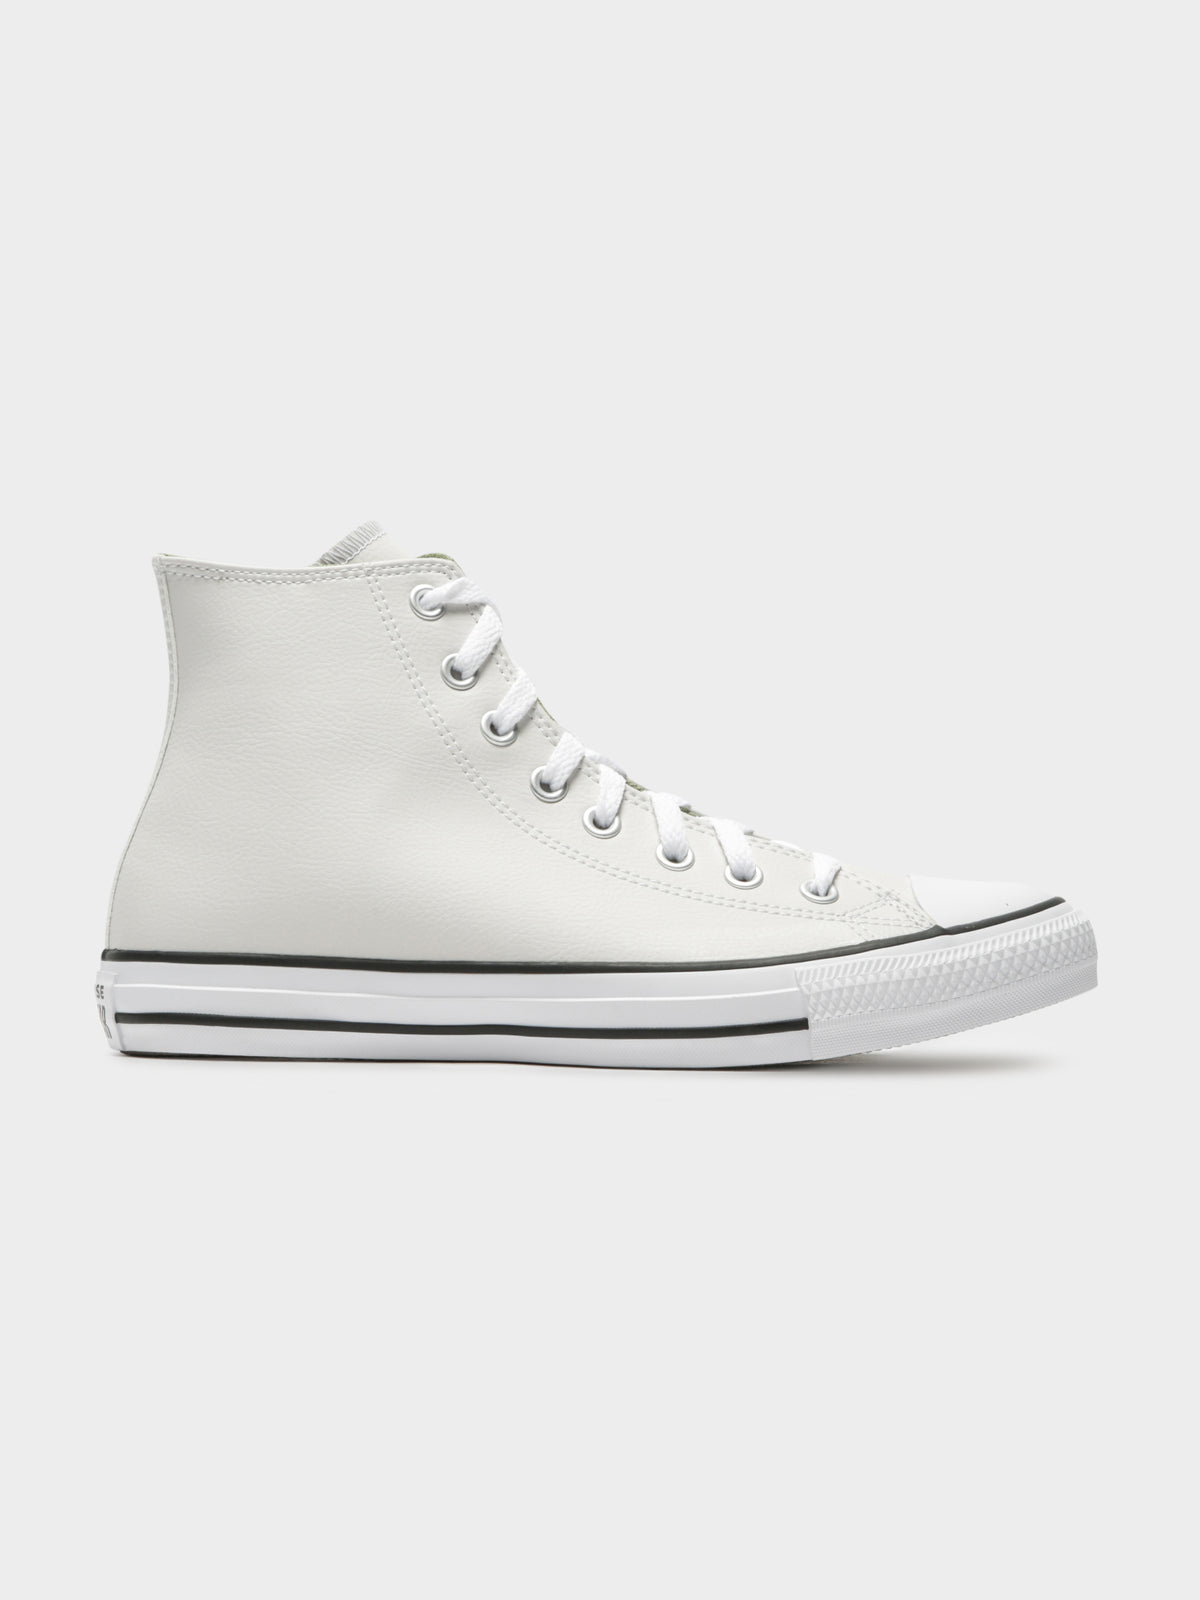 Unisex Chuck Taylor Hi All Star Leather Sneakers in Grey &amp;amp; Green